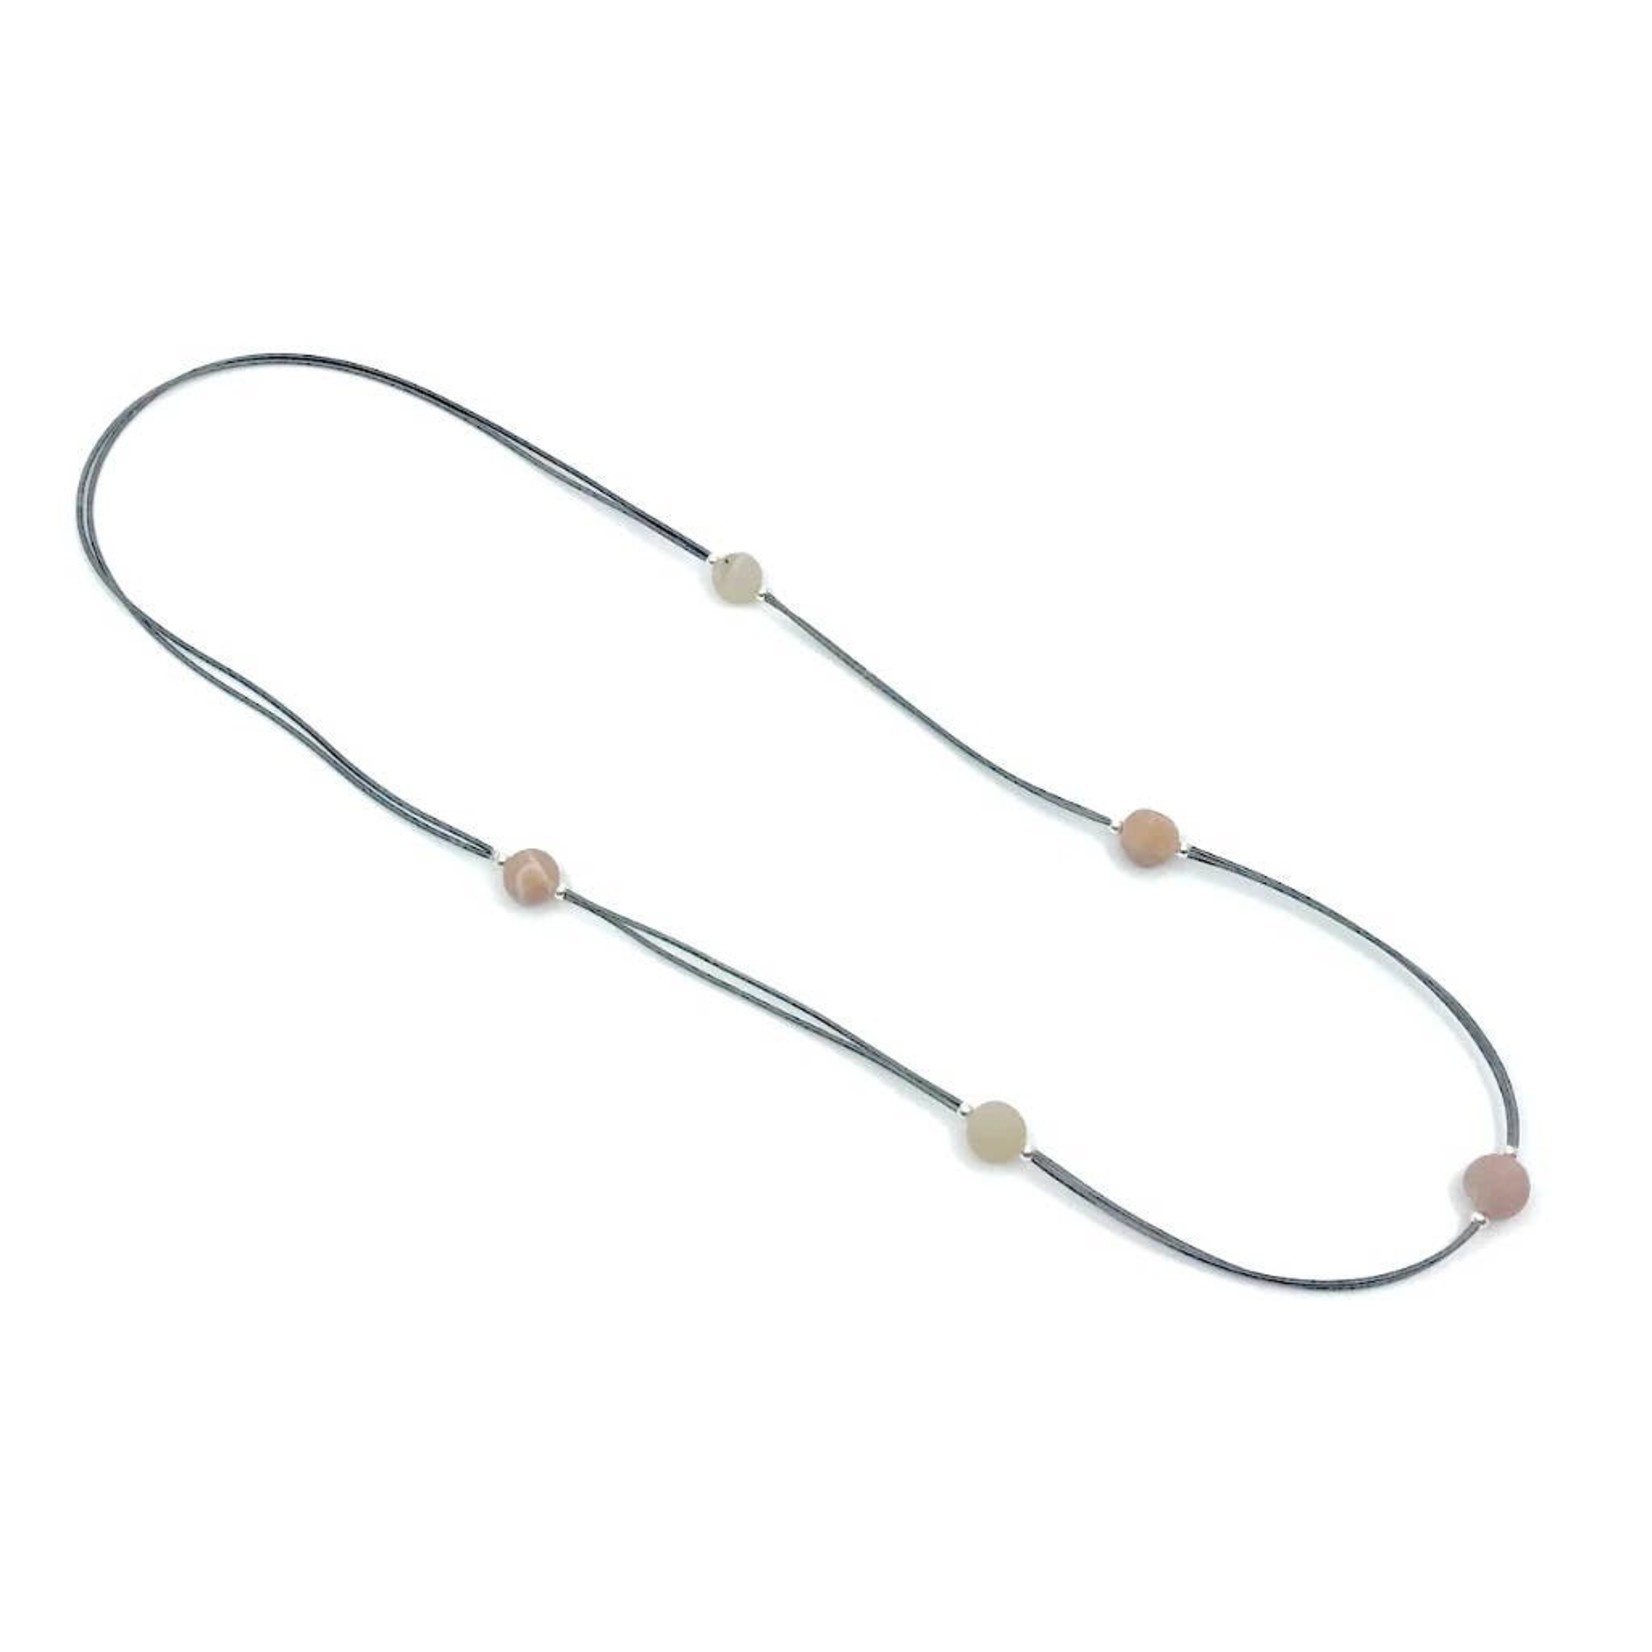 Sea Lily 2 Strand Slate Wire Necklace w/Apricot Geode Beads